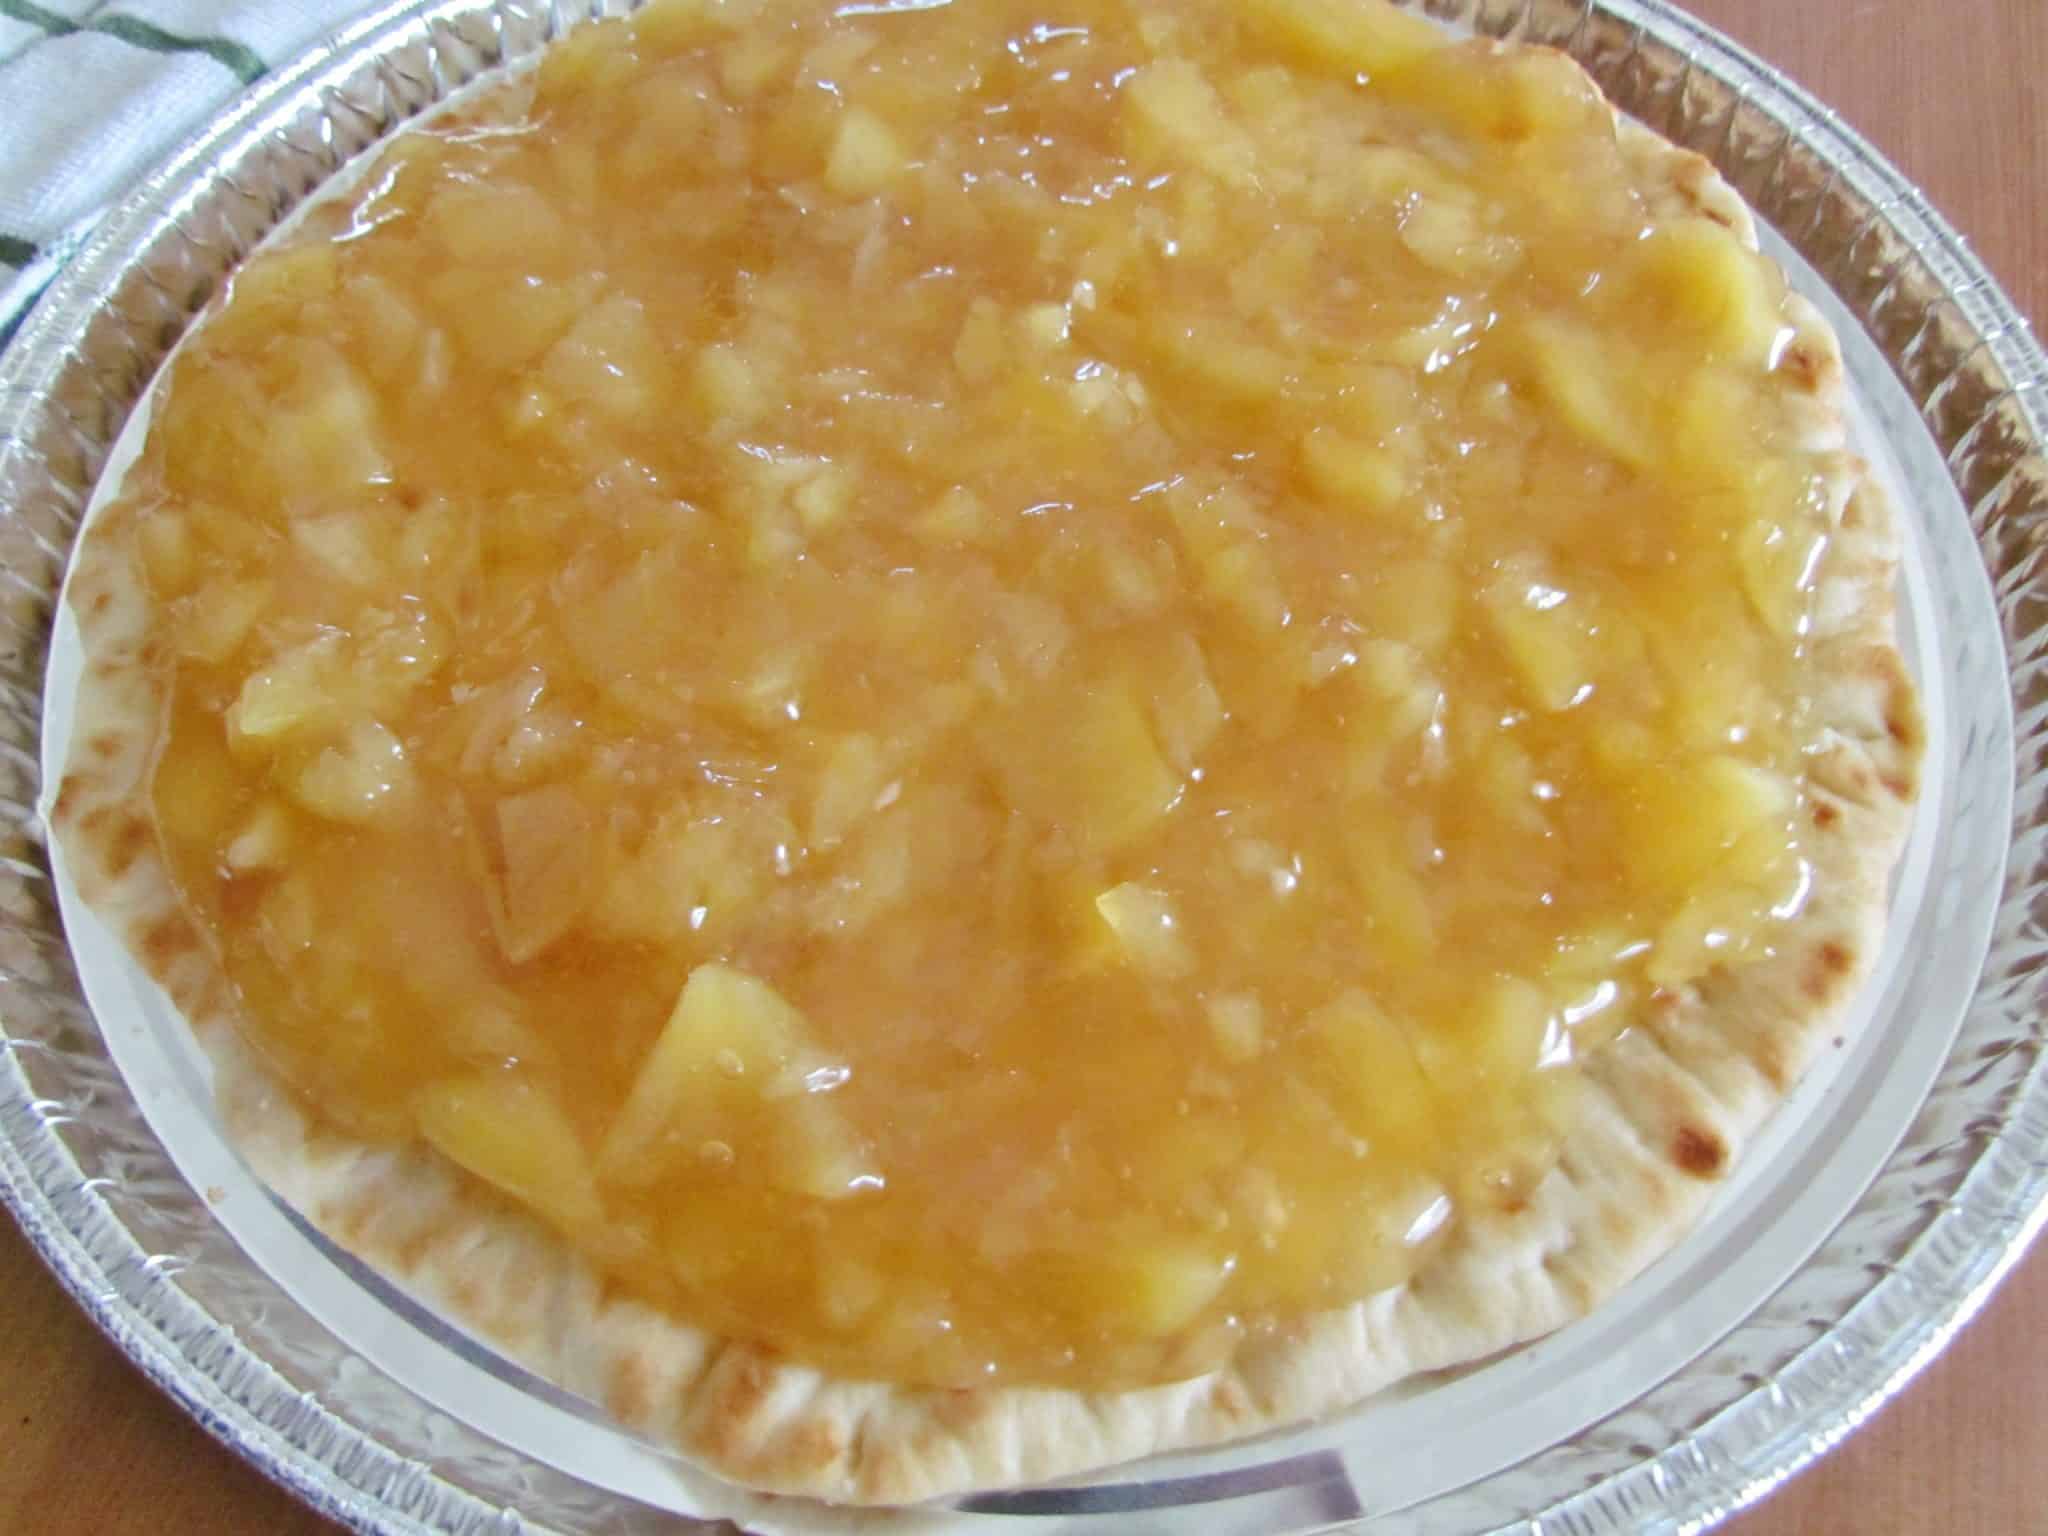 apple pie filling spread onto a store-bought thin crust pizza crust.